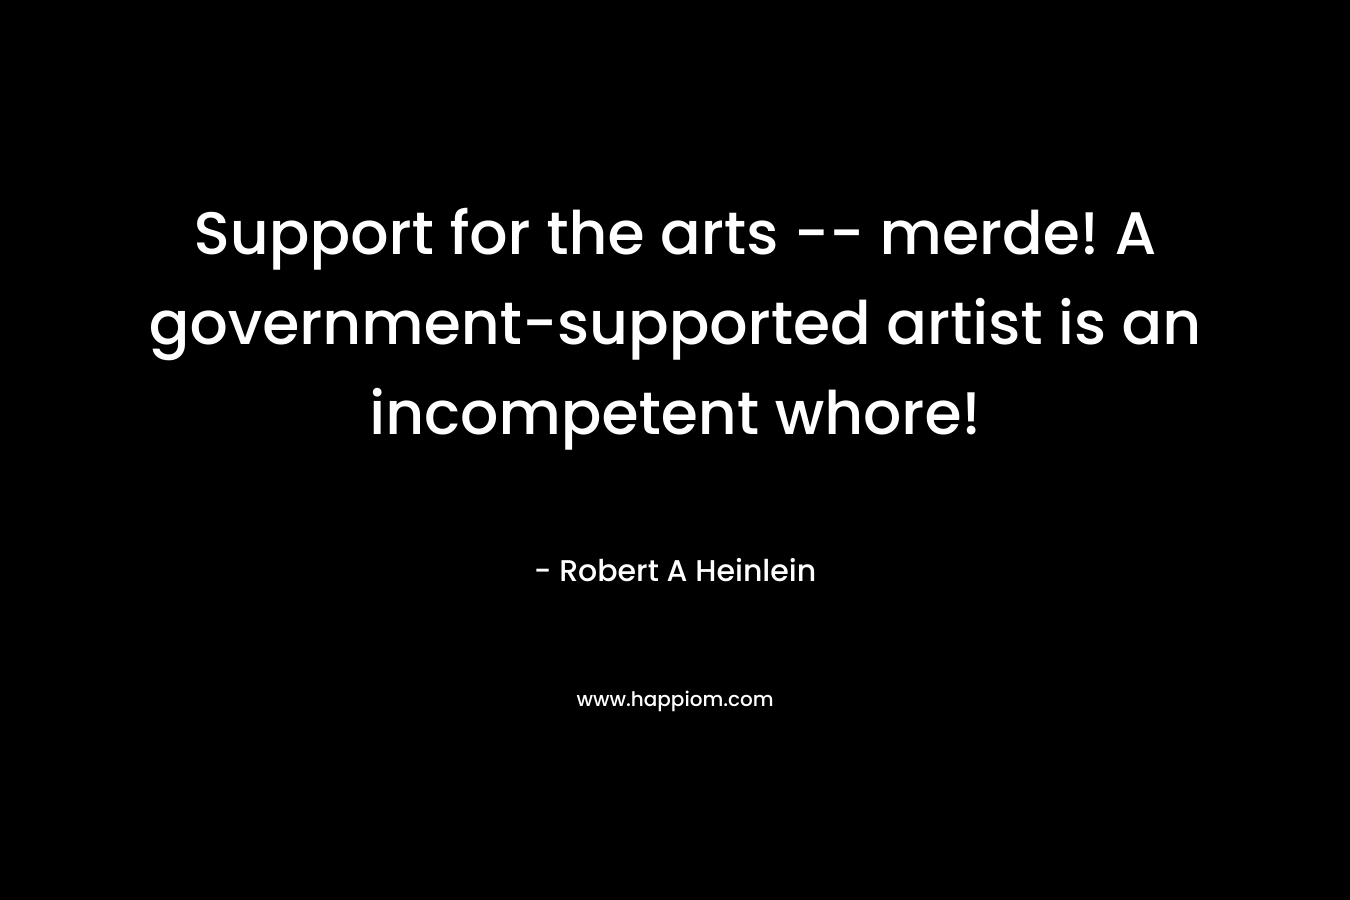 Support for the arts — merde! A government-supported artist is an incompetent whore! – Robert A Heinlein